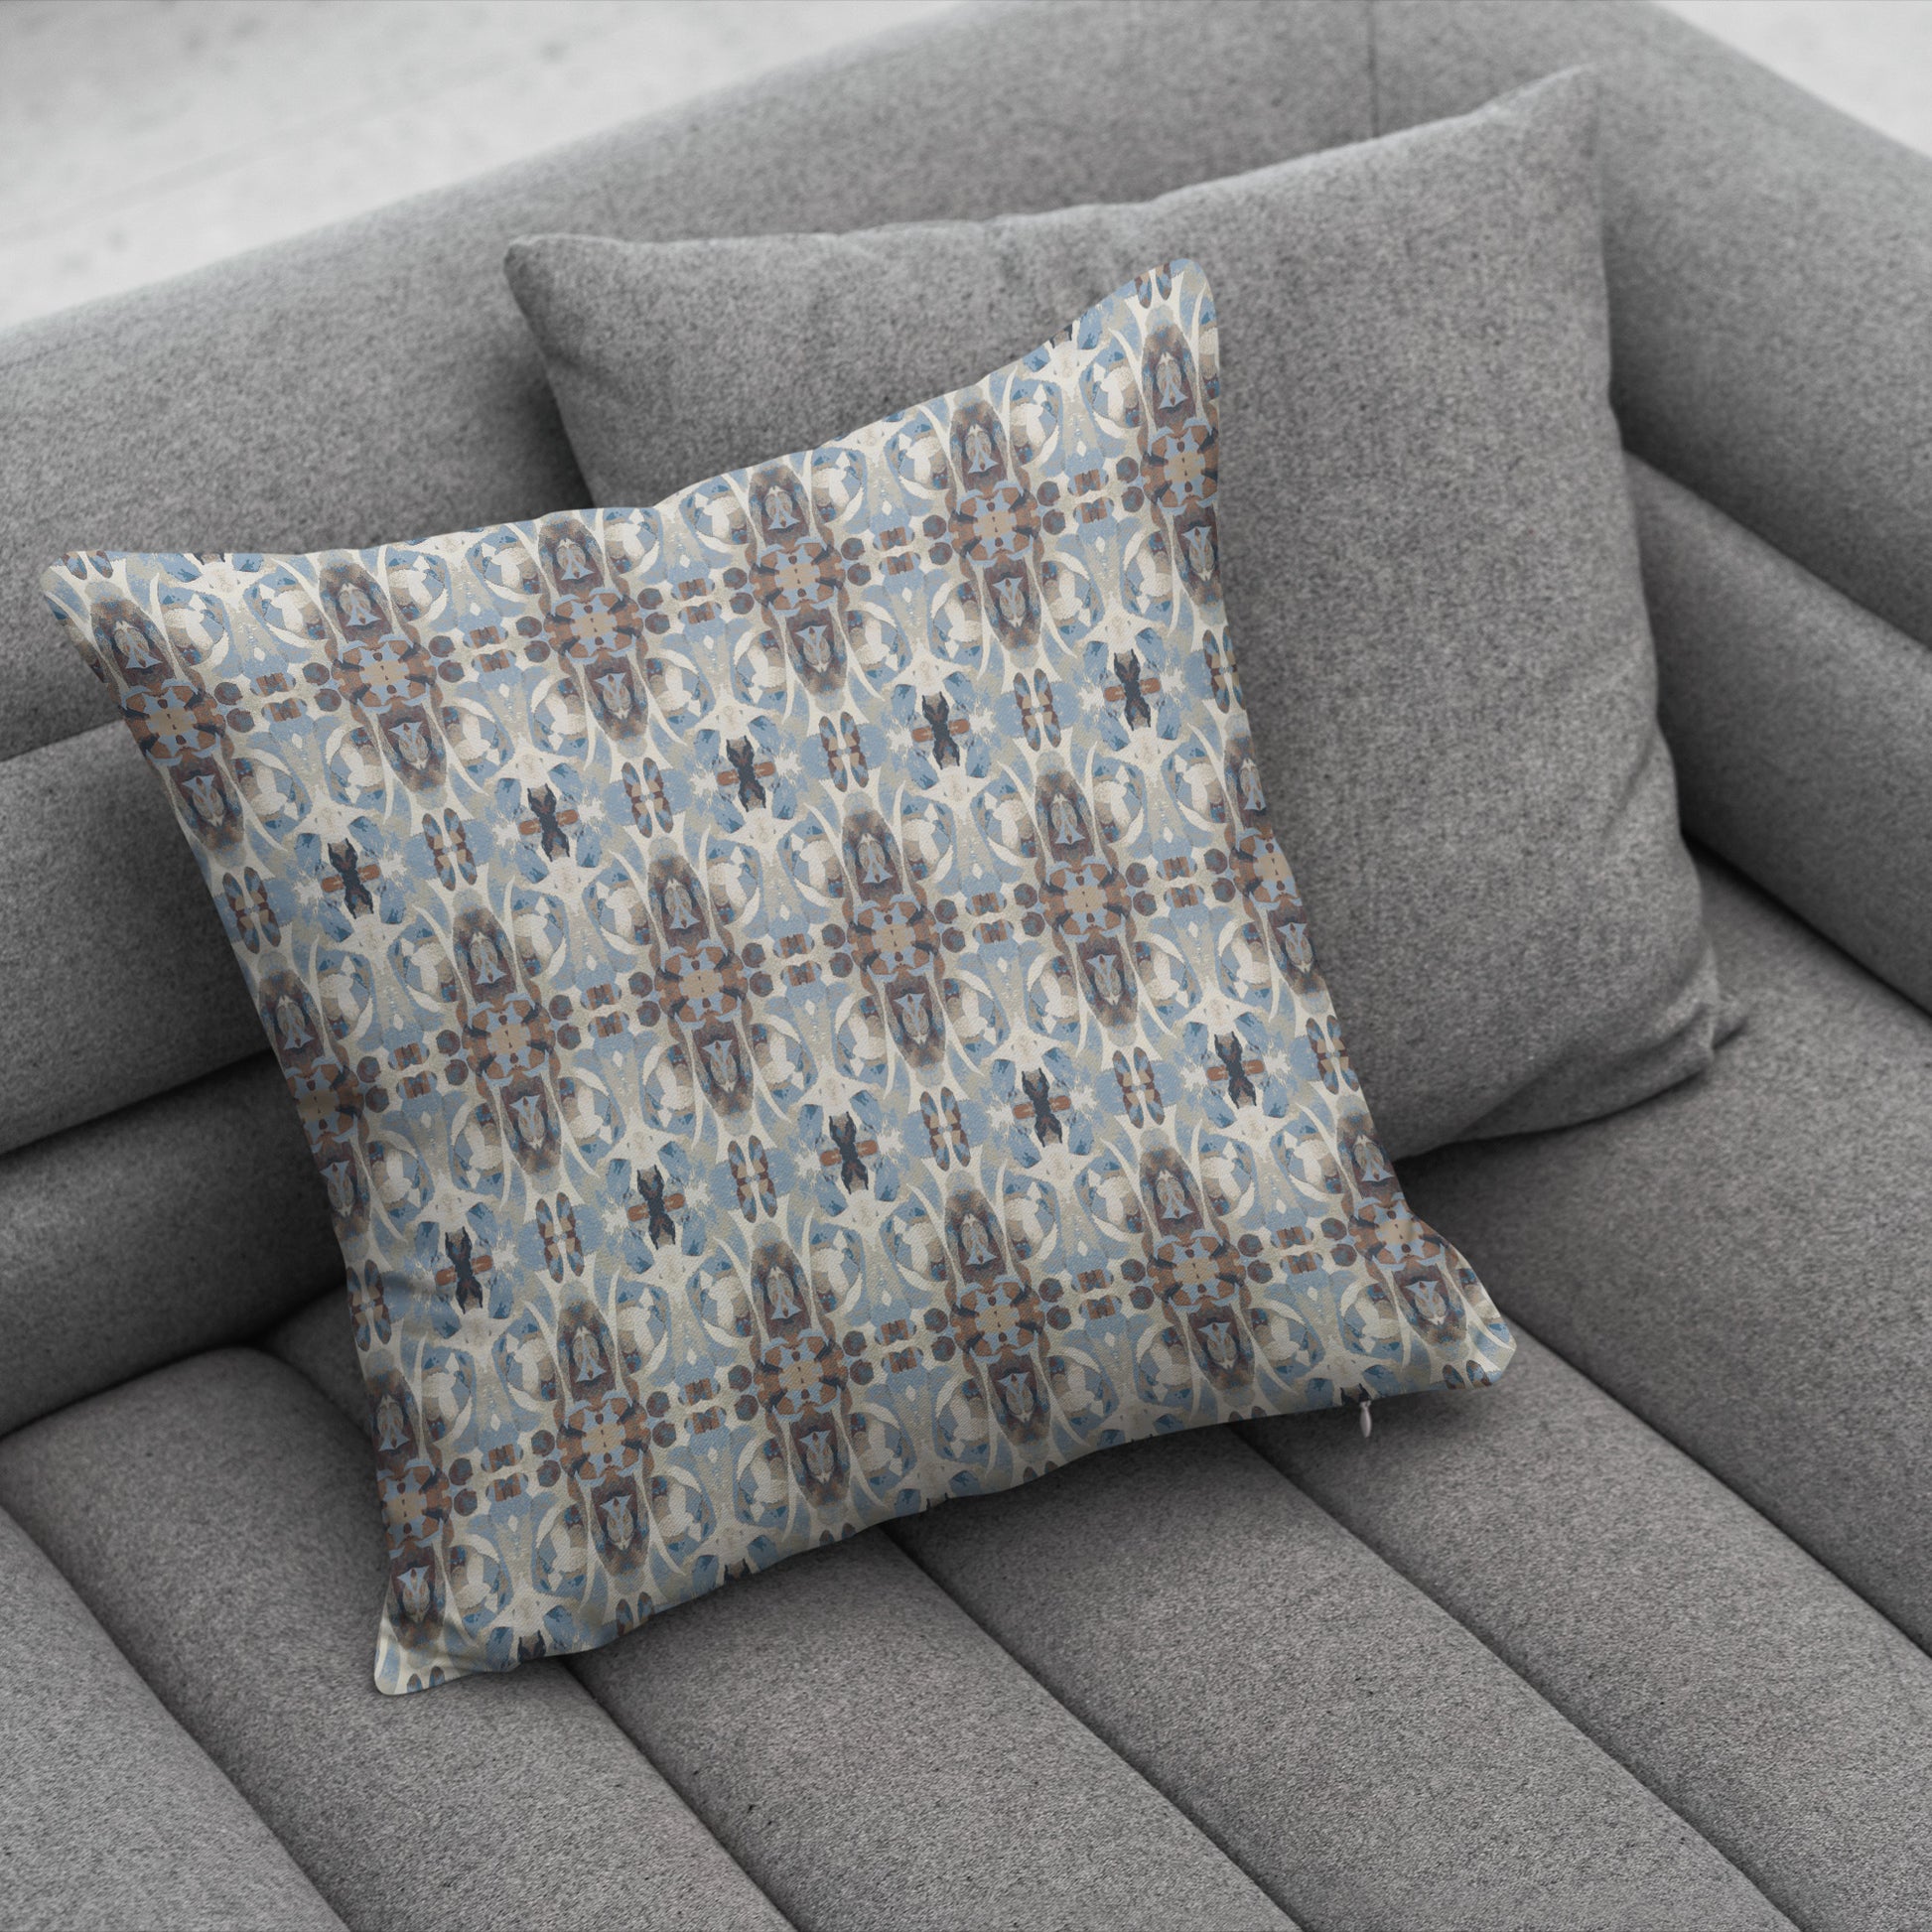 Blue and brown patterned pillow sitting on a gray couch.